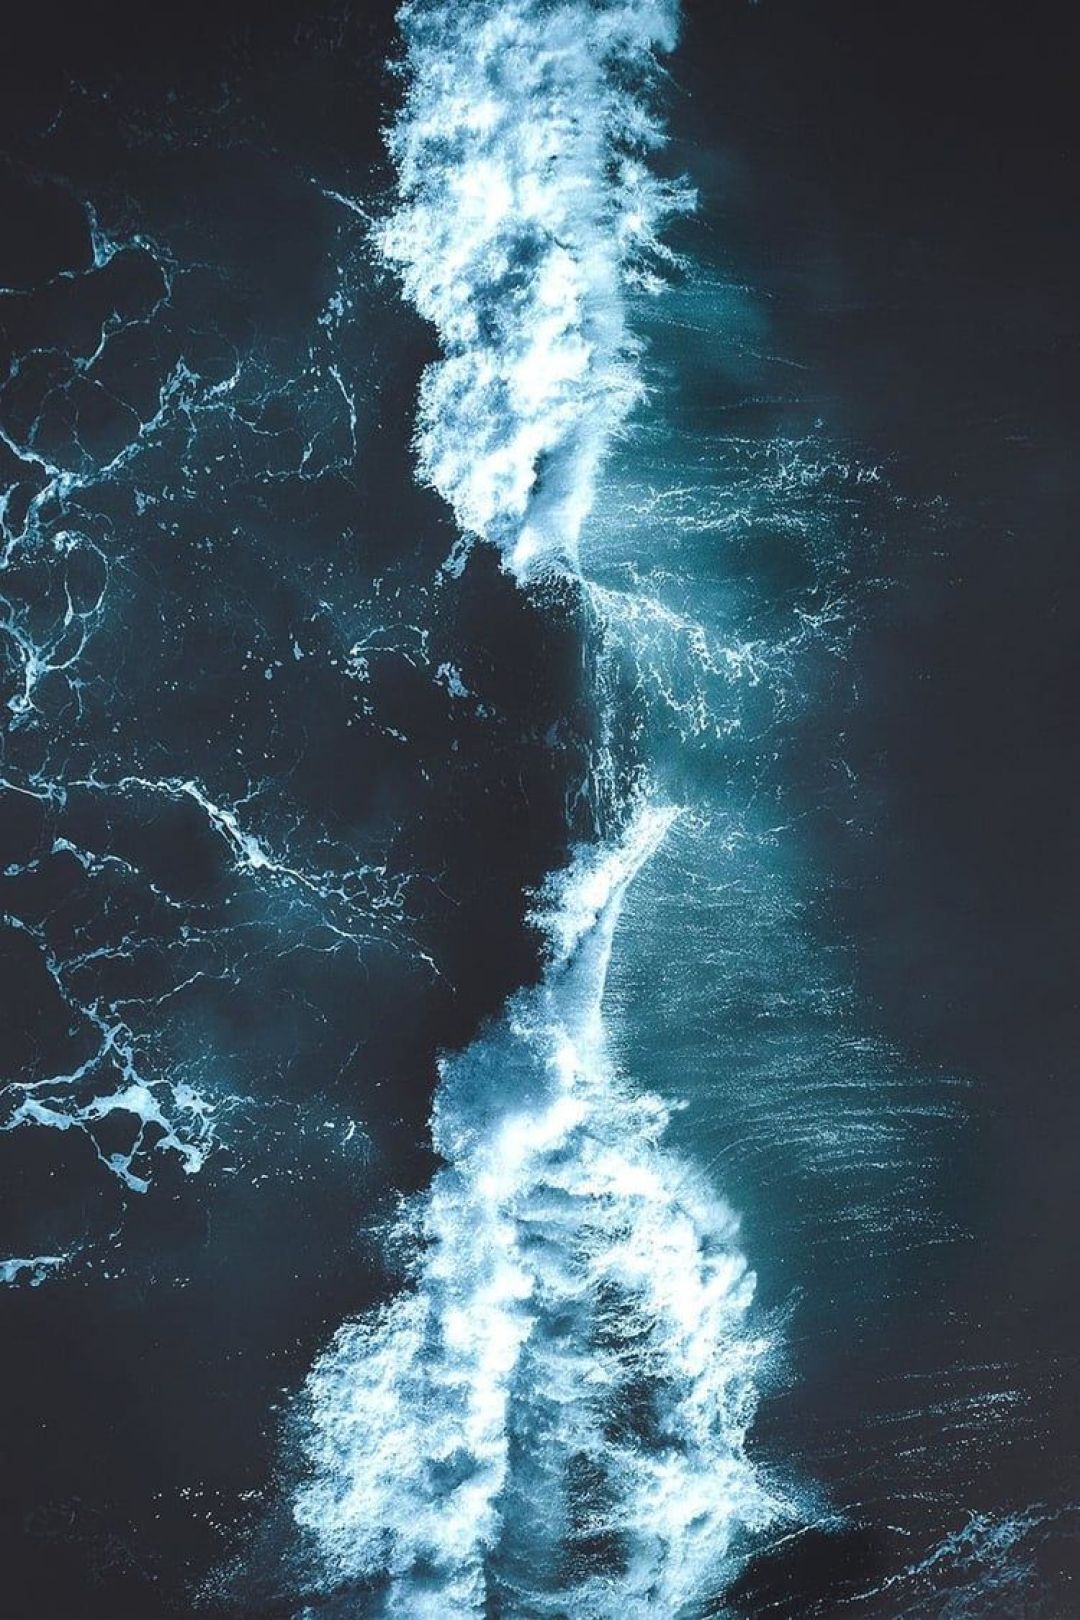 An aerial view of a wave breaking on the ocean - Navy blue, dark blue